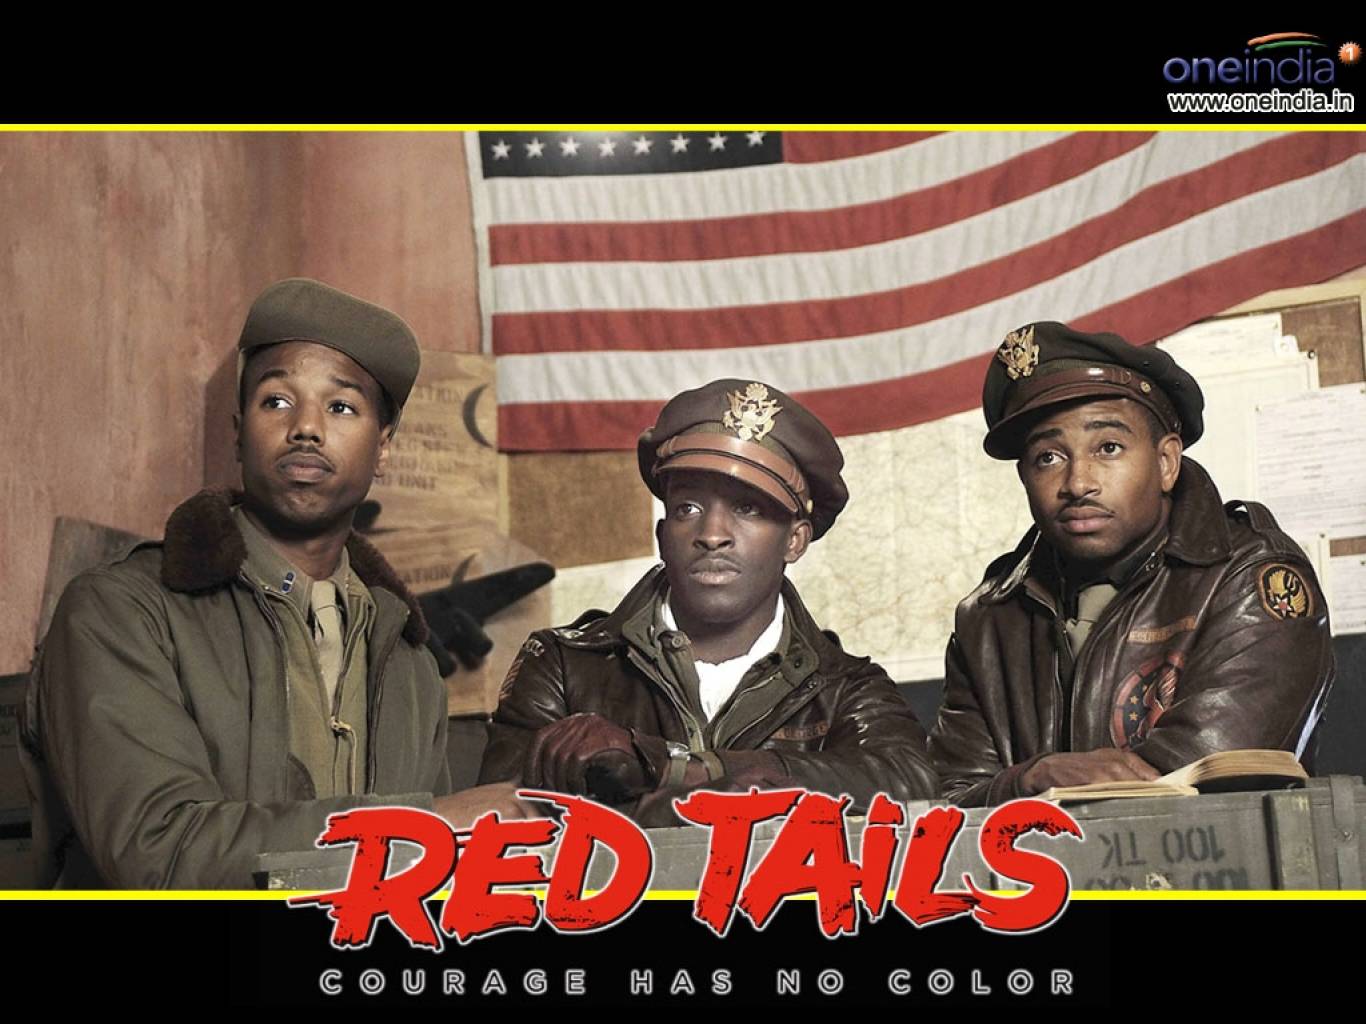 Red Tails Movie HD Wallpaper. Red Tails HD Movie Wallpaper Free Download (1080p to 2K)